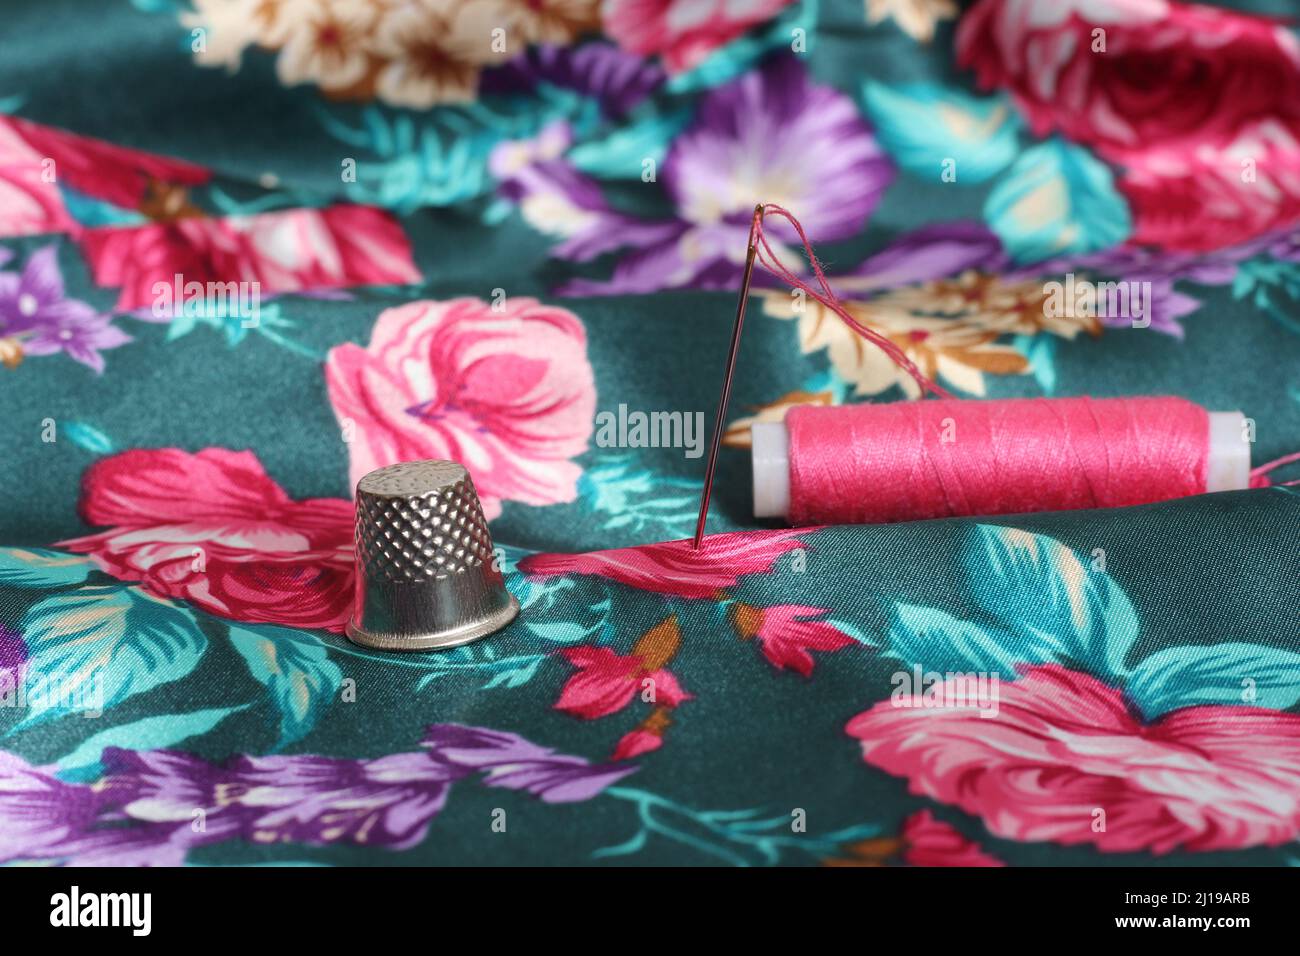 Thimble With Needle and Pink Thread on Vintage Floral Satin Fabric Green and Pink Stock Photo